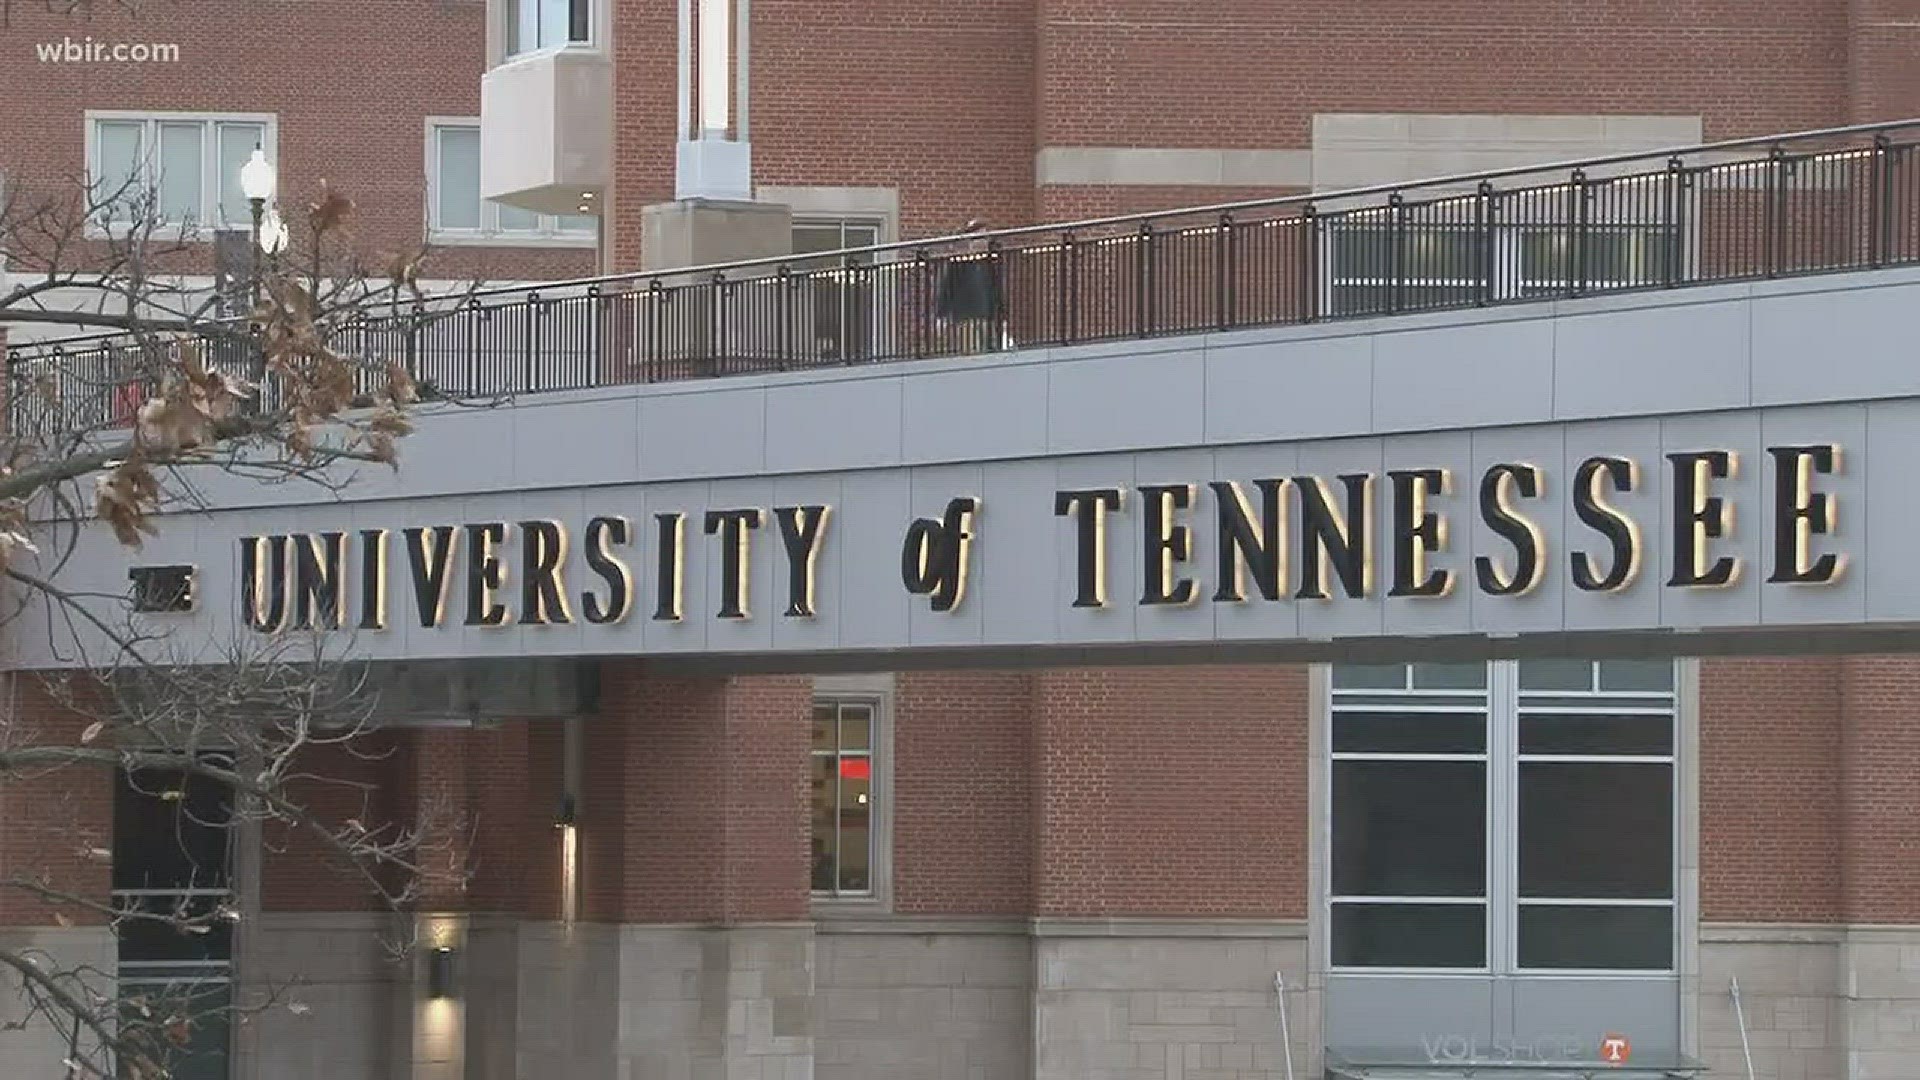 Feb. 16, 2018: As the University of Tennessee prepares for the arrival of a white nationalist group on Saturday, campus officials are tightening security and organizing a number of different events in an effort to overshadow the group.